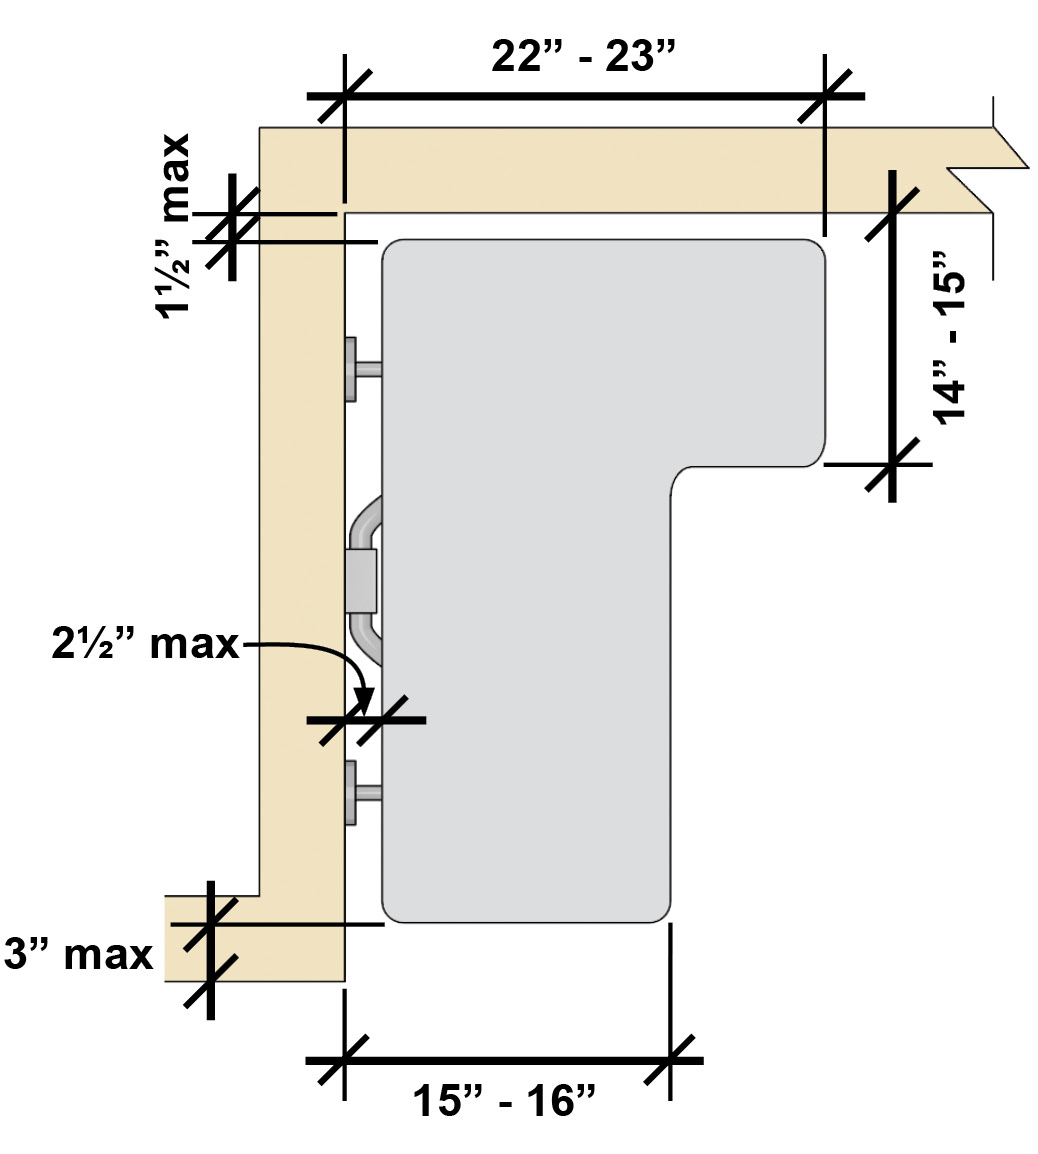 L-shaped shower seat with a rear edge that is 2½ inches maximum from the seat wall and a front edge 15 inches to 16 inches from the seat wall. The rear edge of the L-portion is 1½ inches from the wall and the front edge is 14 inches to 15 inches from the wall. The end of the L is 22 inches to 23 inches from the main seat wall.